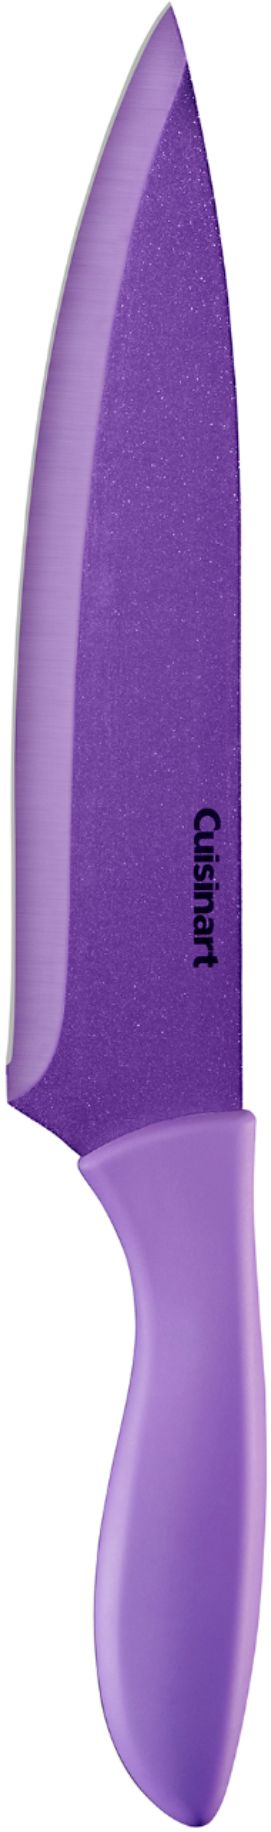 CUISINART 8 Inch Chef's Knife Stainless Steel Purple Cook +Blade Guard  Advantage